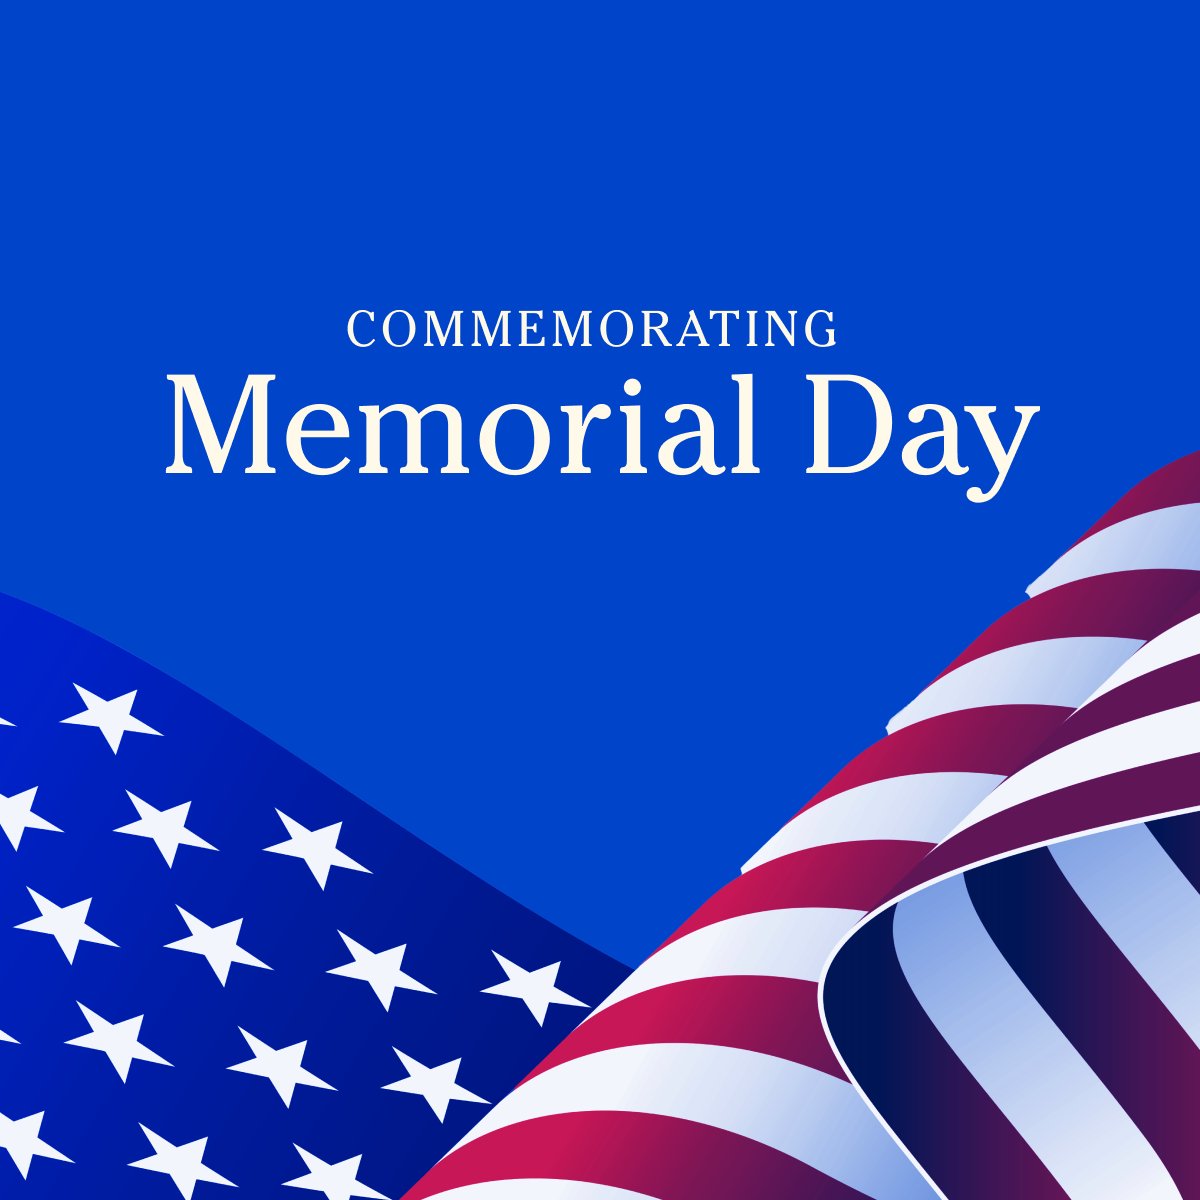 On Memorial Day, we remember those who gave their lives to protect our nation and safeguard our freedoms. We honor their sacrifice today and every day.